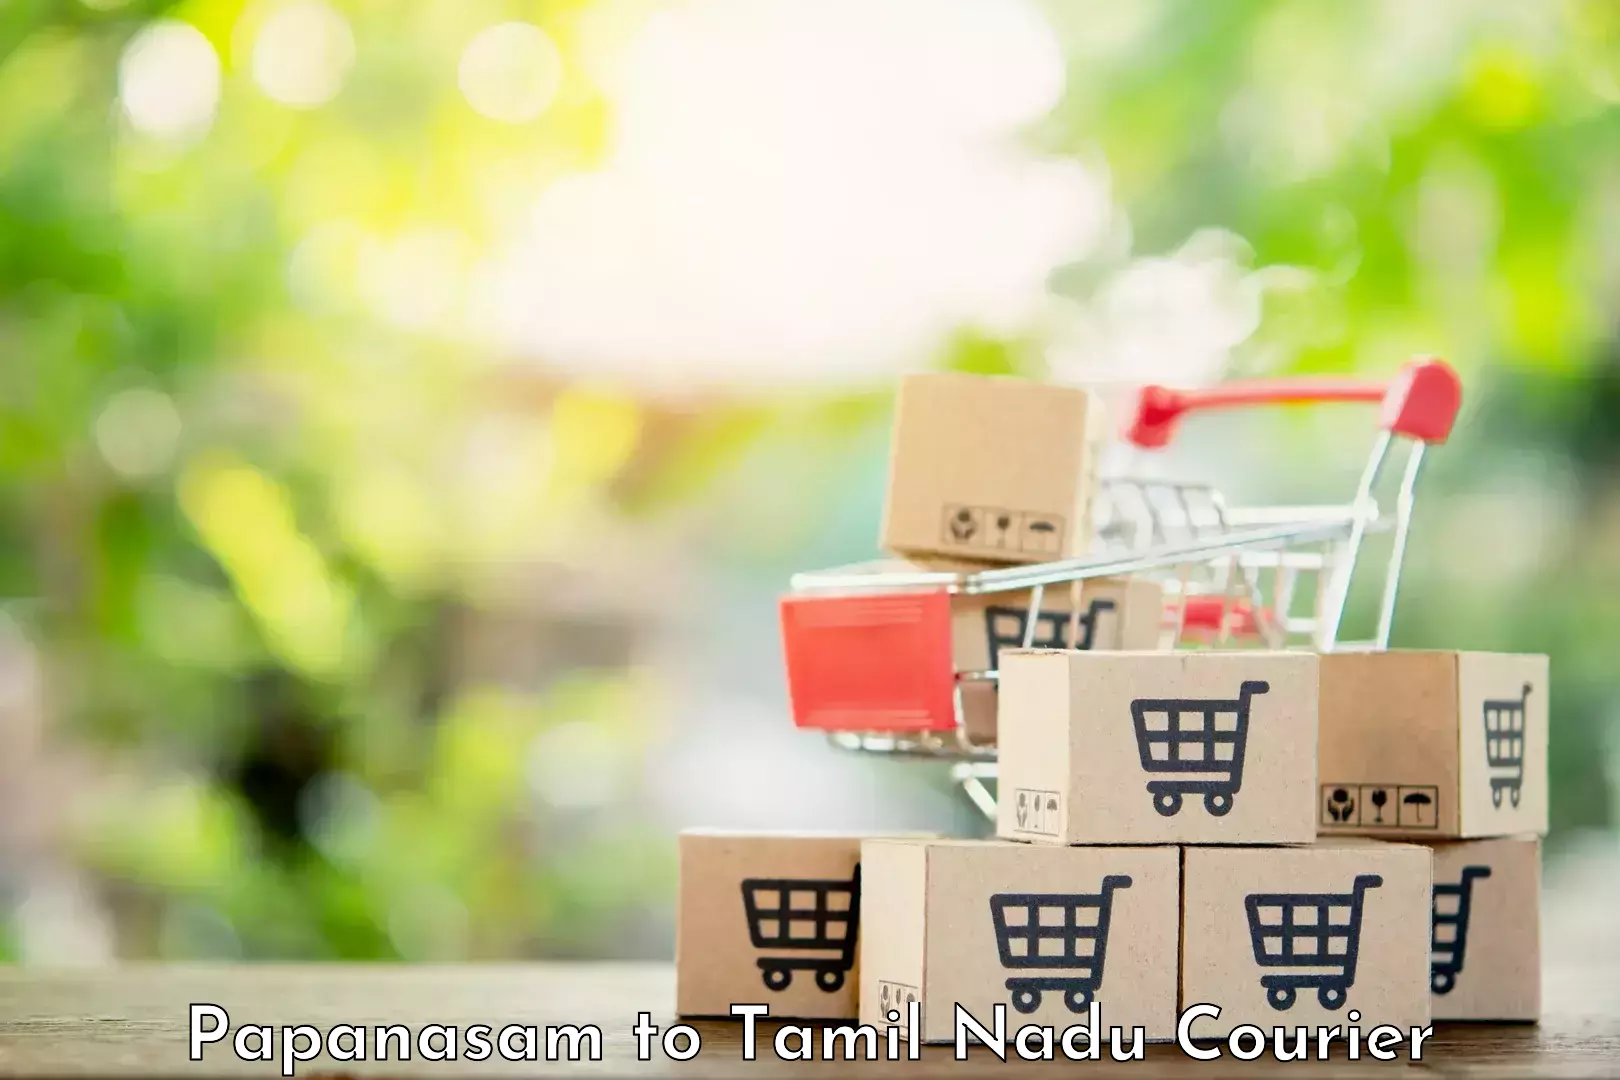 User-friendly delivery service Papanasam to Sivaganga